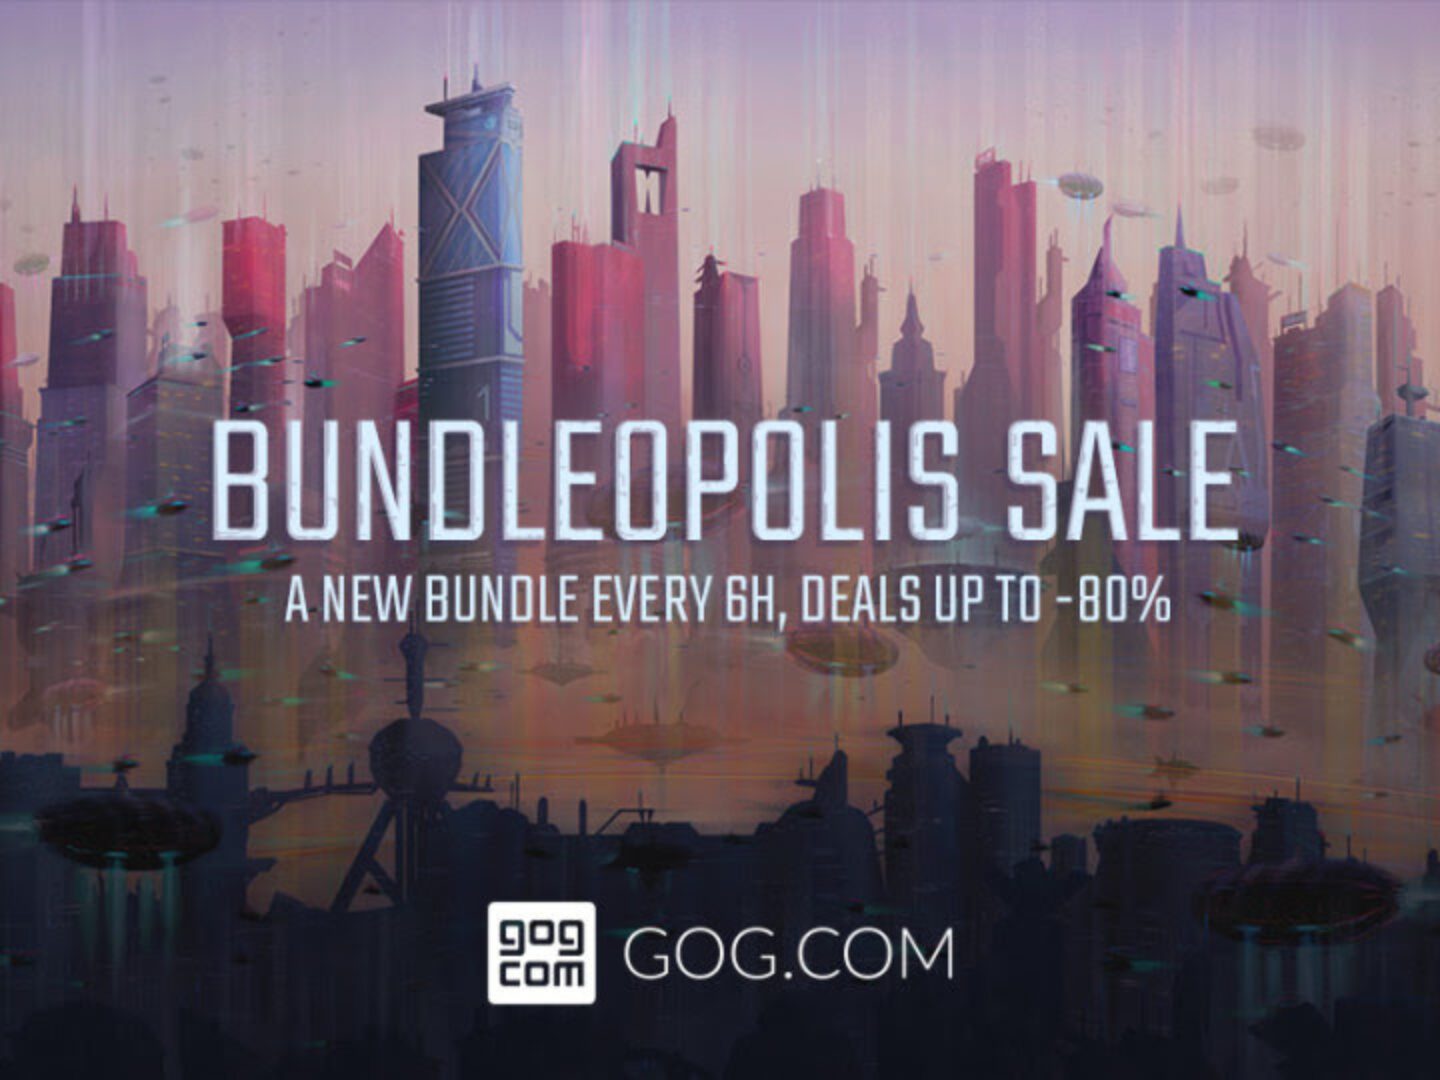 Get Your Wallets Ready Thanks to GOG’s Super Sale!